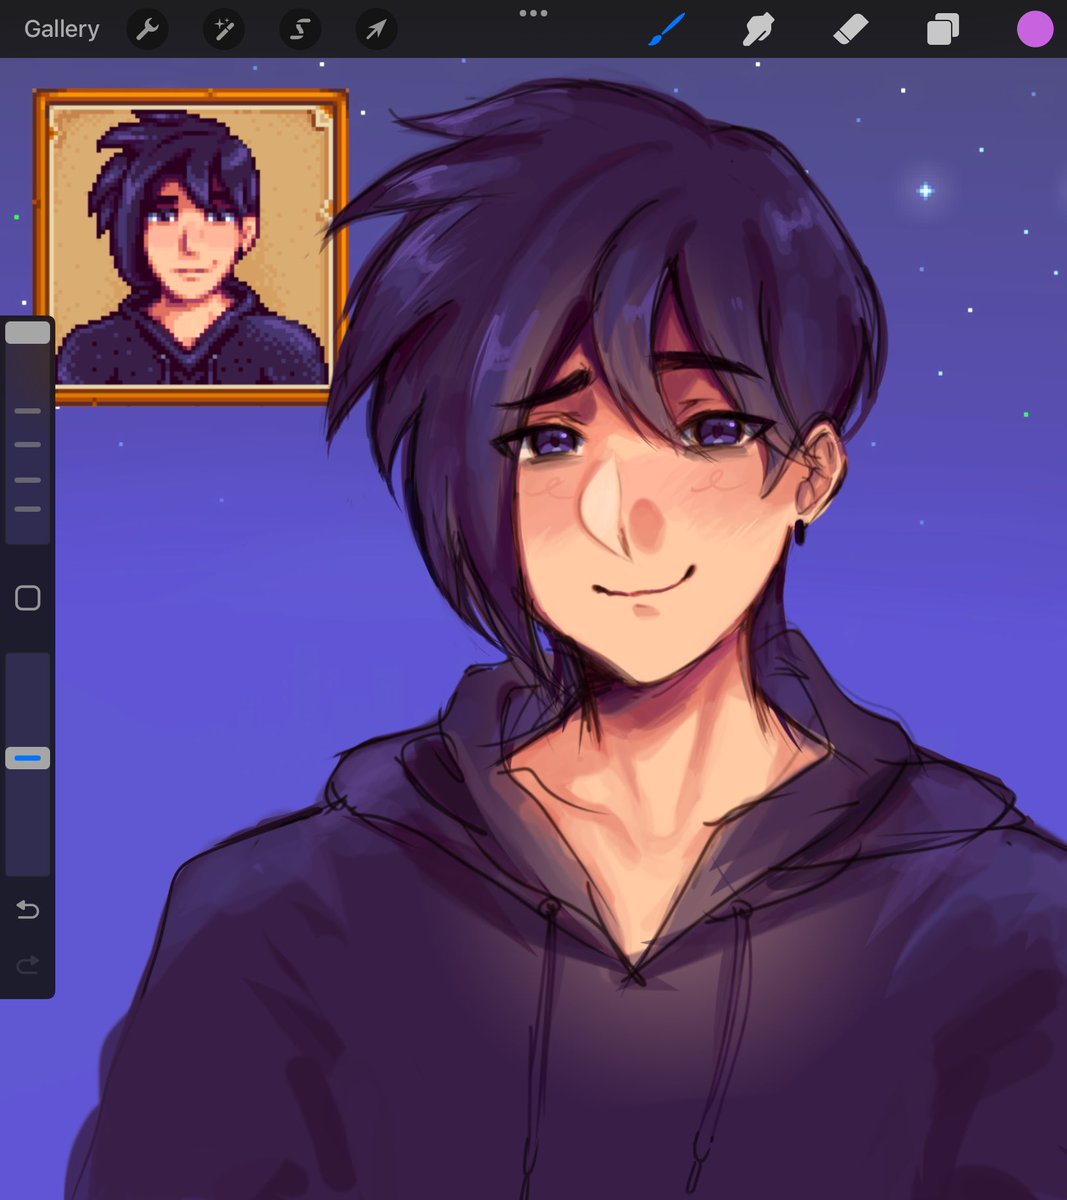 Sketch of this sebastian expression #StardewValley